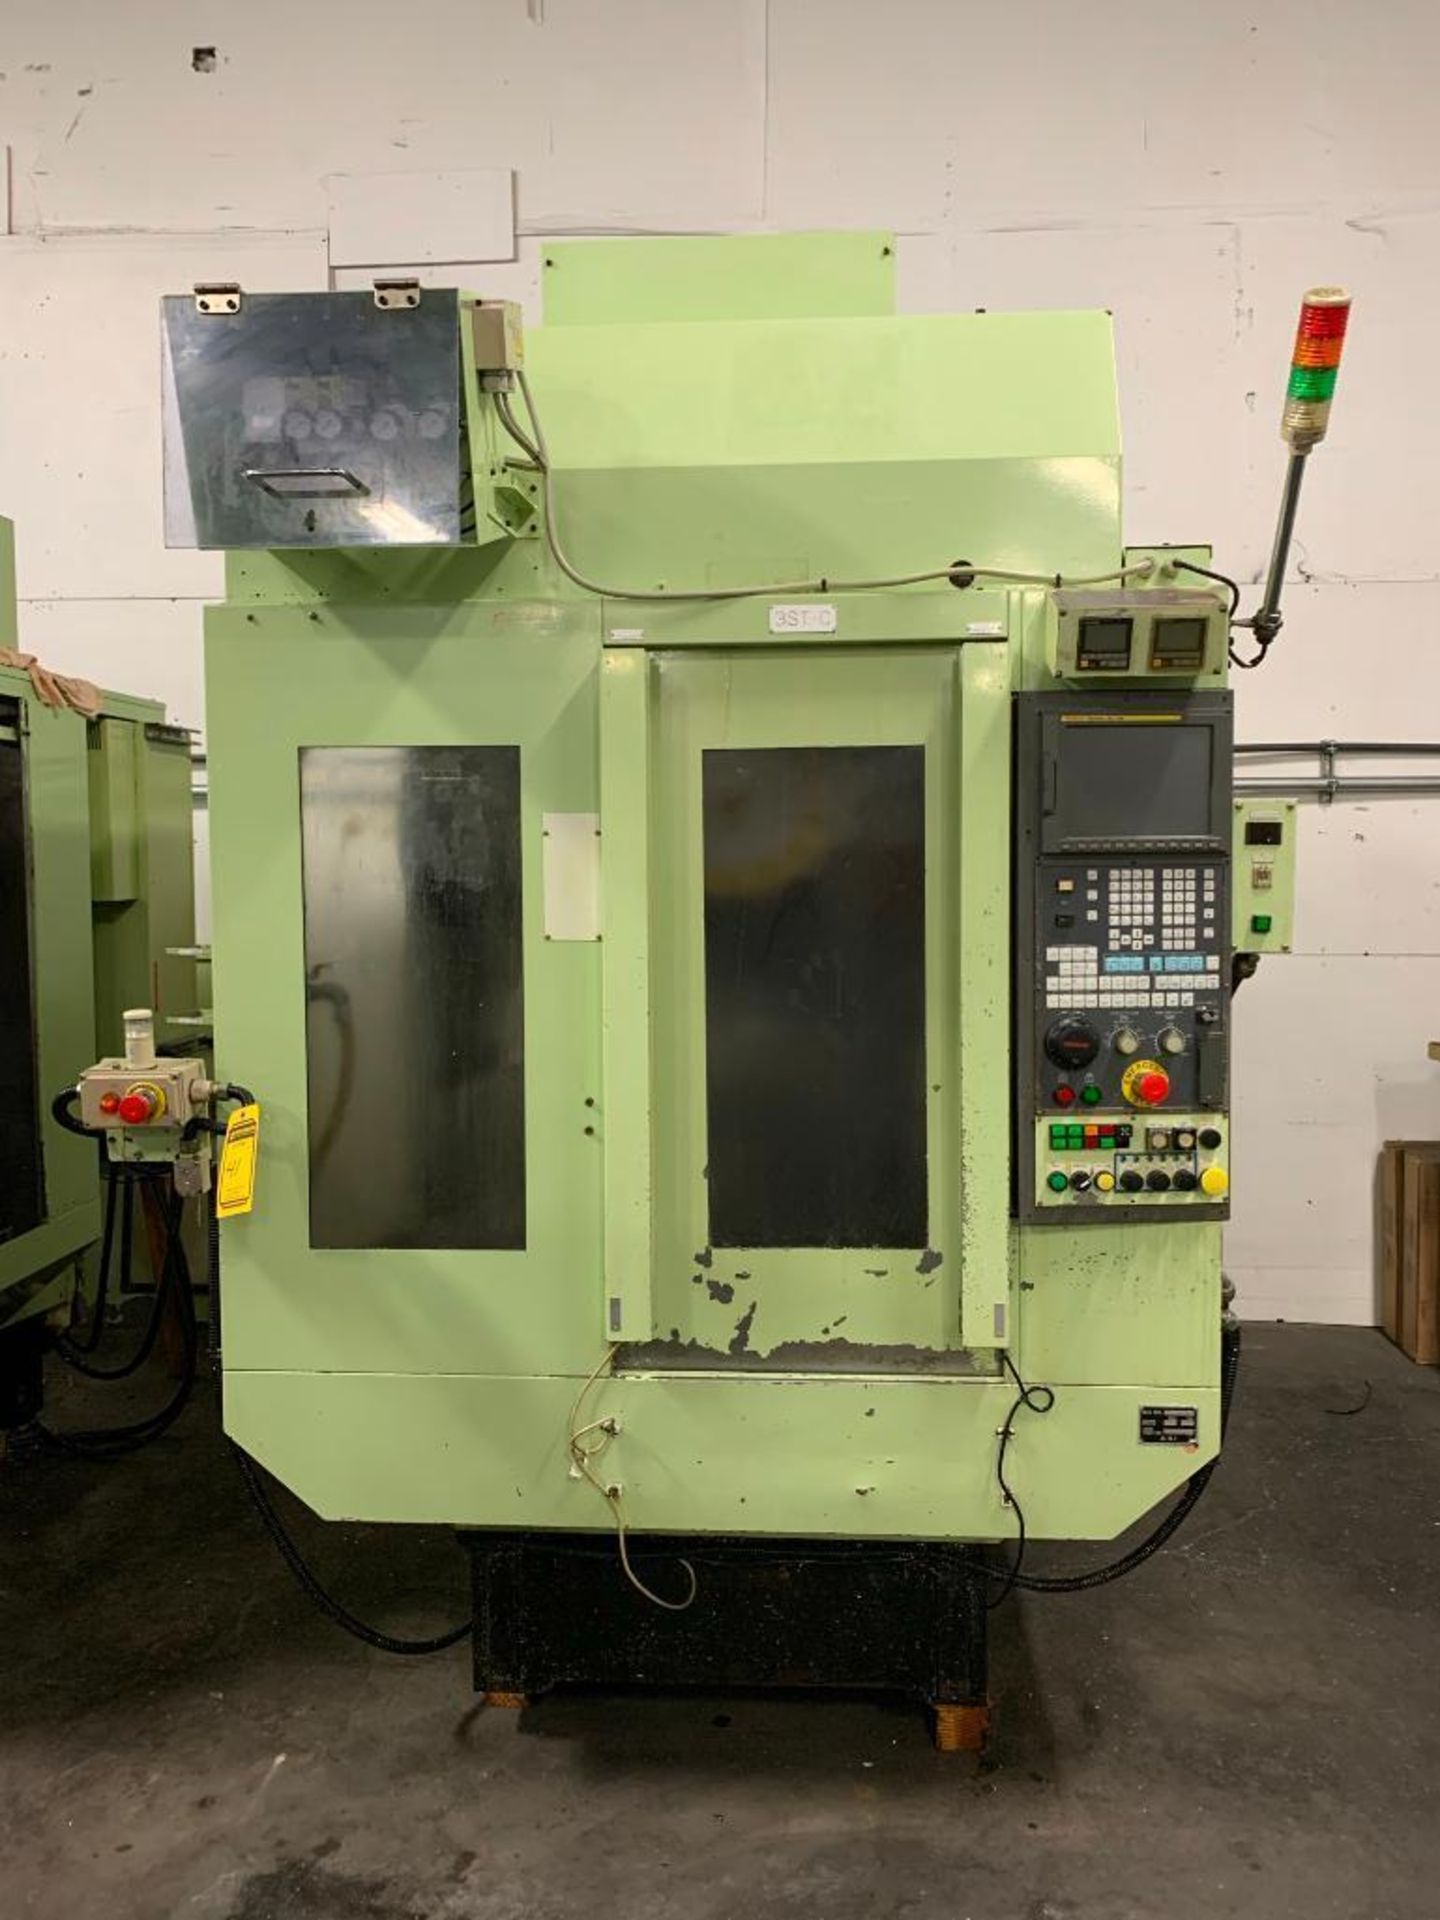 2001 FANUC ROBODRILL A-T14IC 4-AXIS VERTICAL MACHINING CENTER, FANUC 16IM CONTROL, 4TH & 5TH AXIS IN